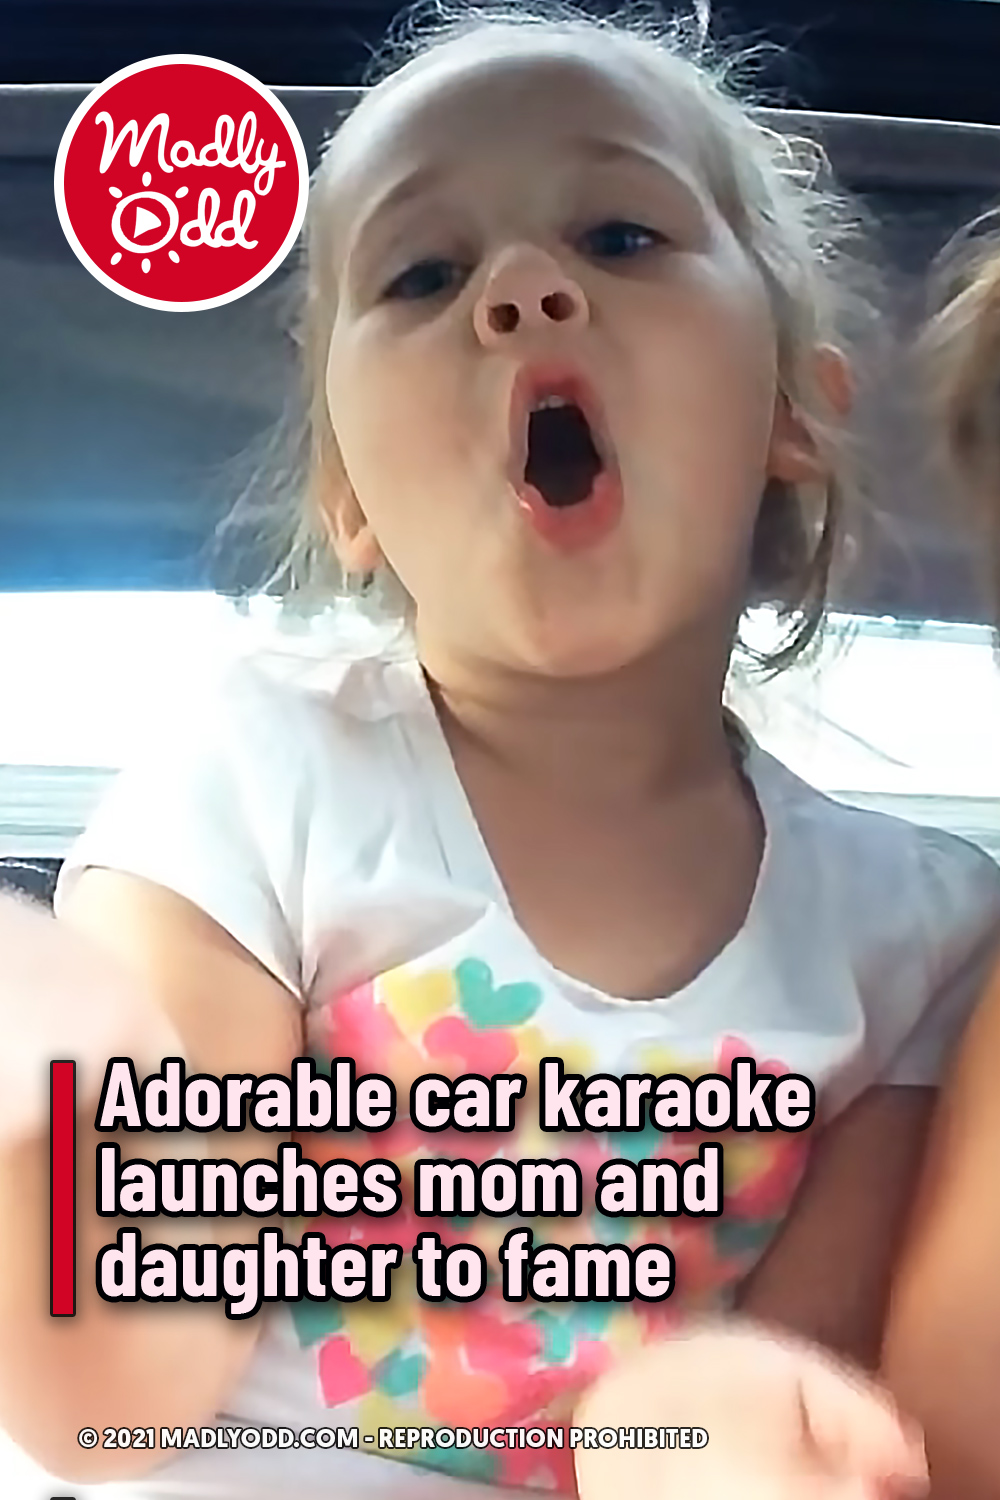 Adorable car karaoke launches mom and daughter to fame